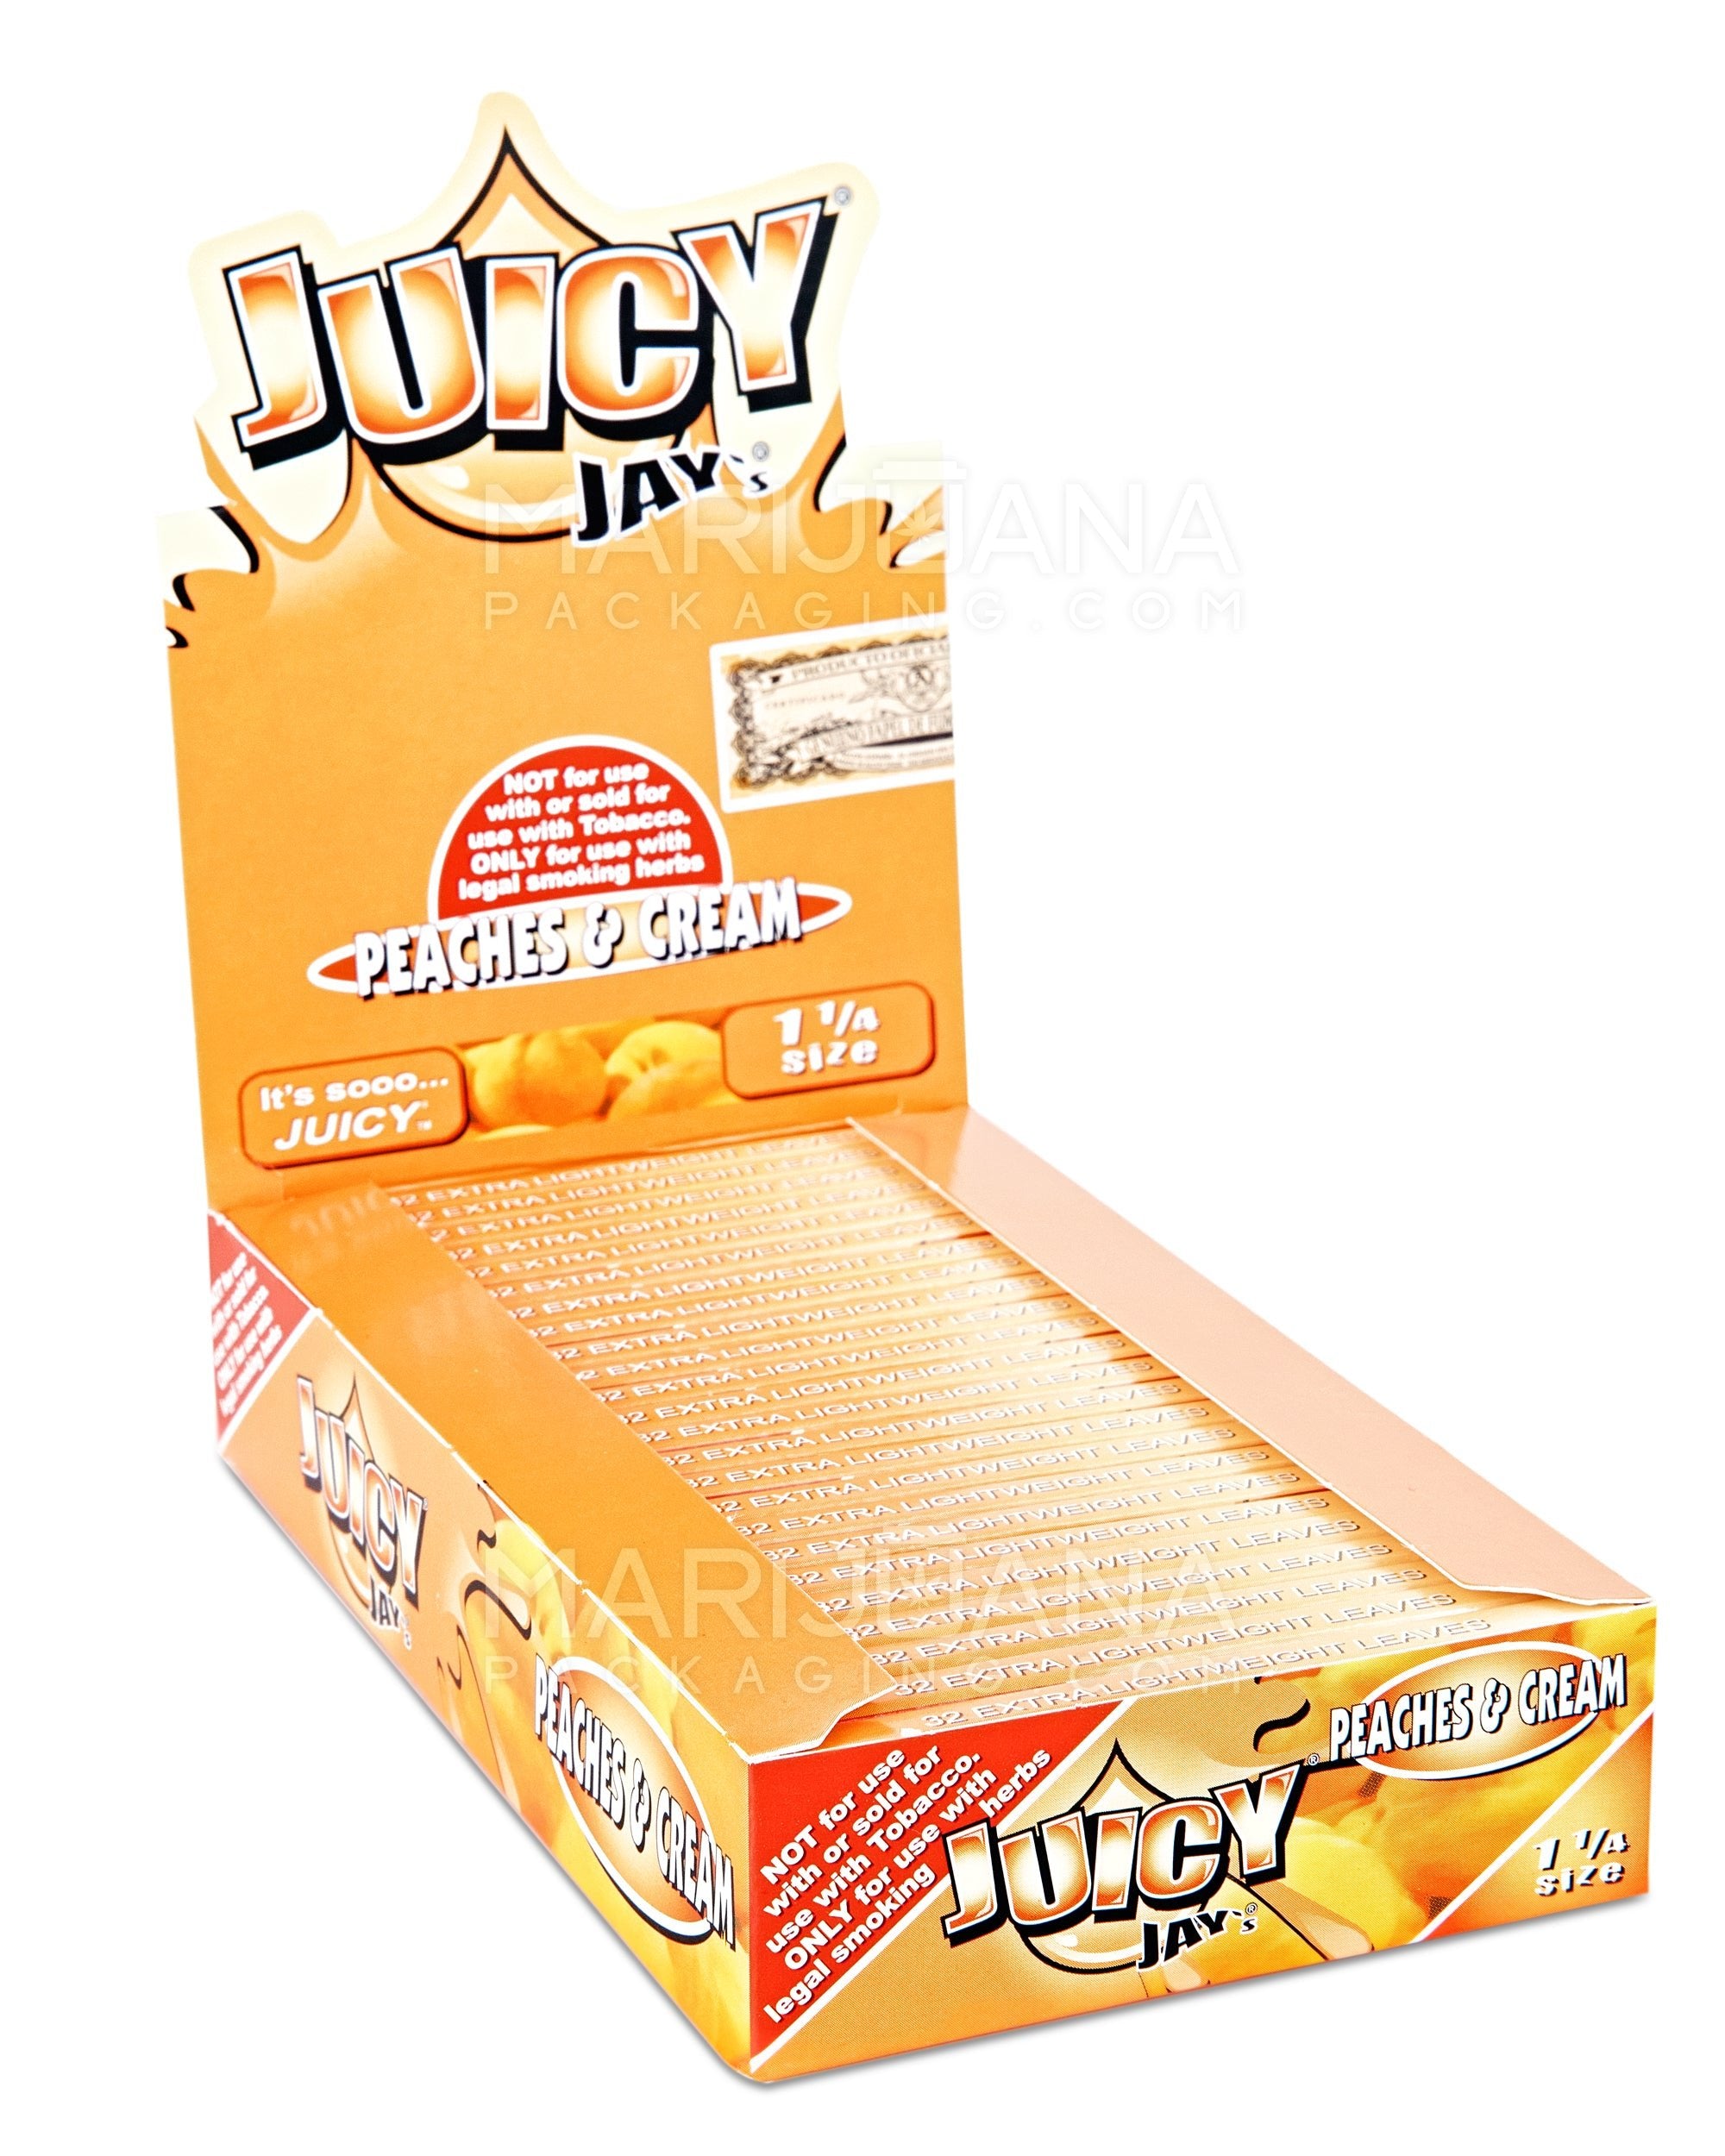 JUICY JAY'S | 'Retail Display' 1 1/4 Size Hemp Rolling Papers | 76mm - Peaches & Cream - 24 Count - 1